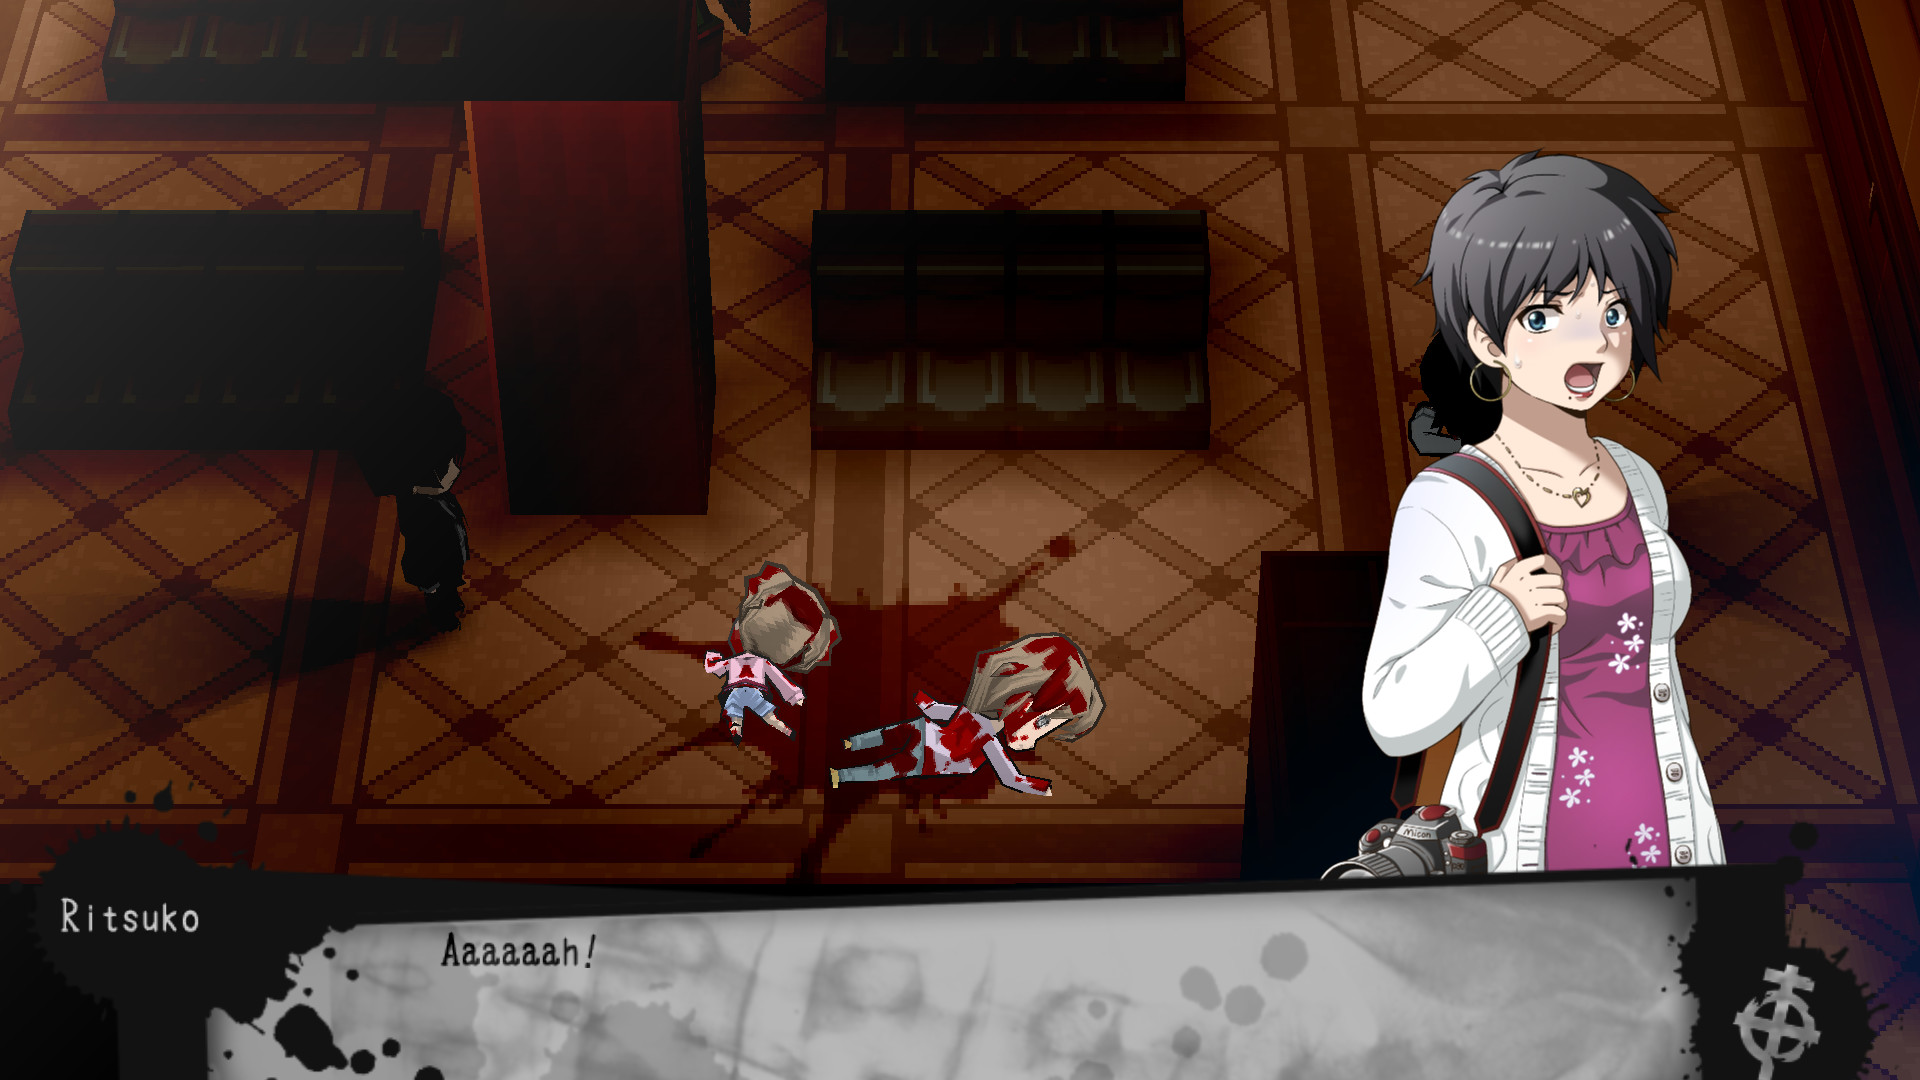 Corpse Party 2: Dead Patient on Steam